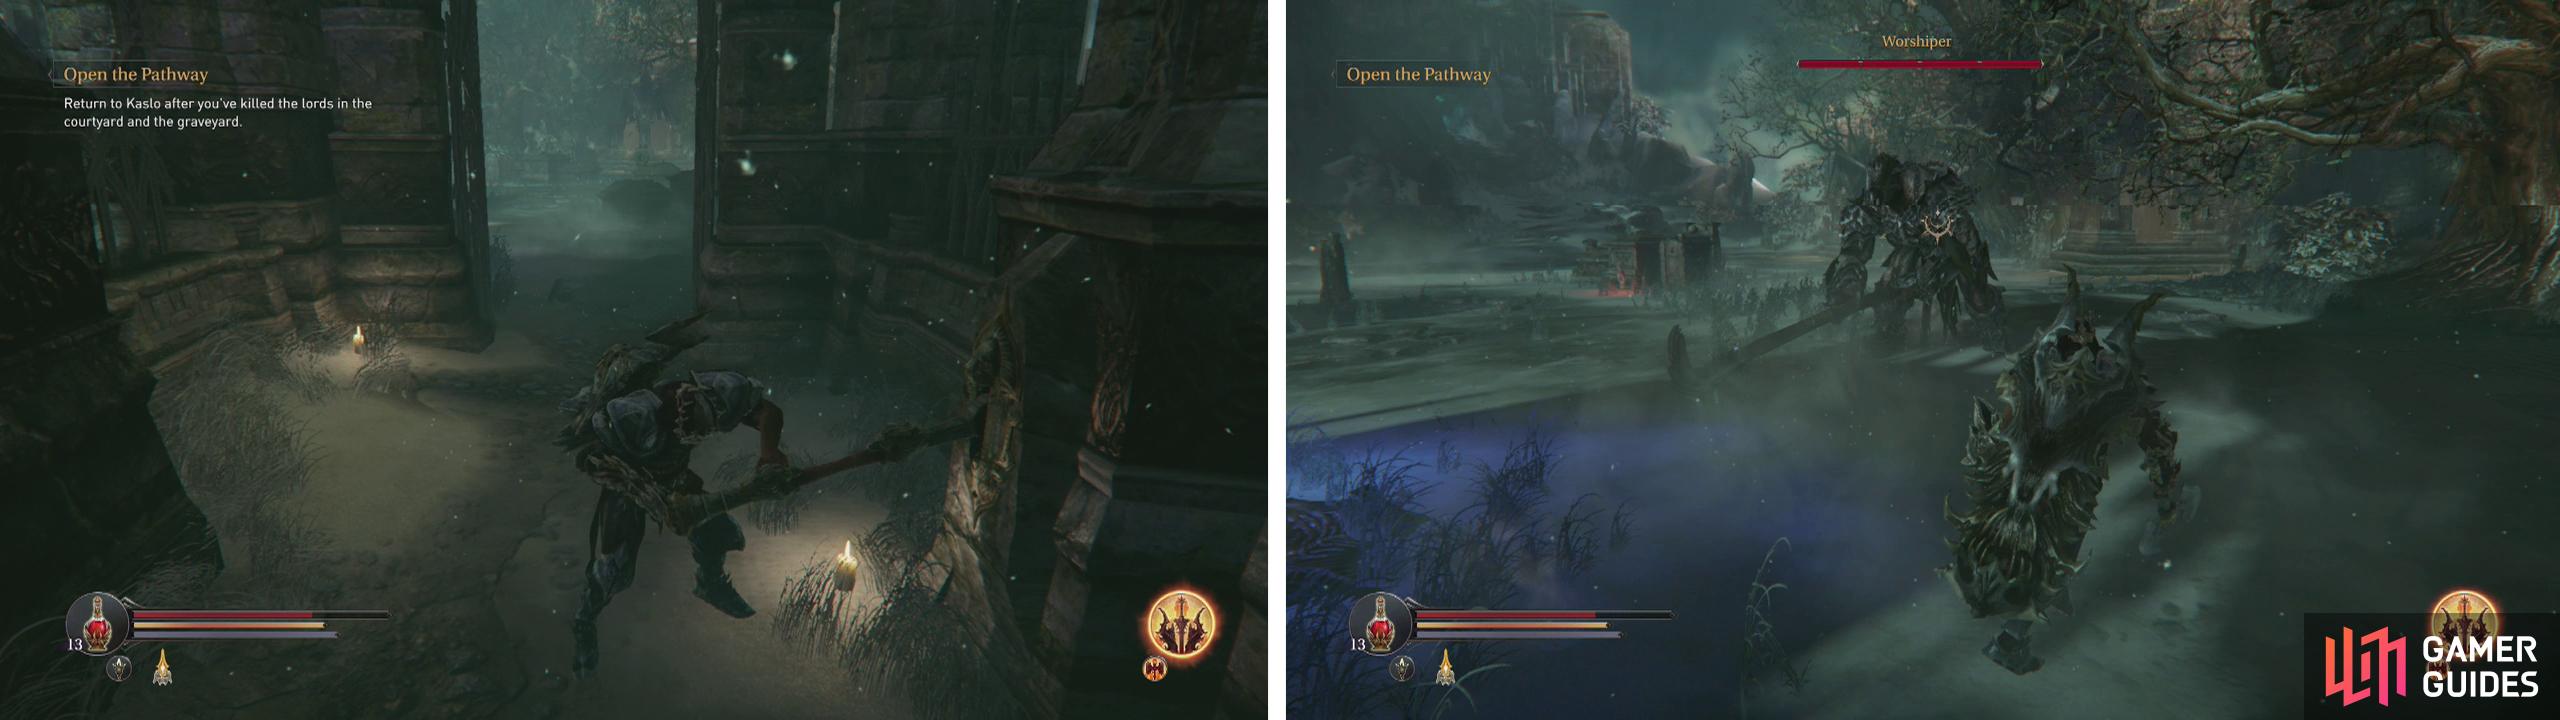 Pull the lever (left) and enter the graveyard to fight the Worshiper (right).